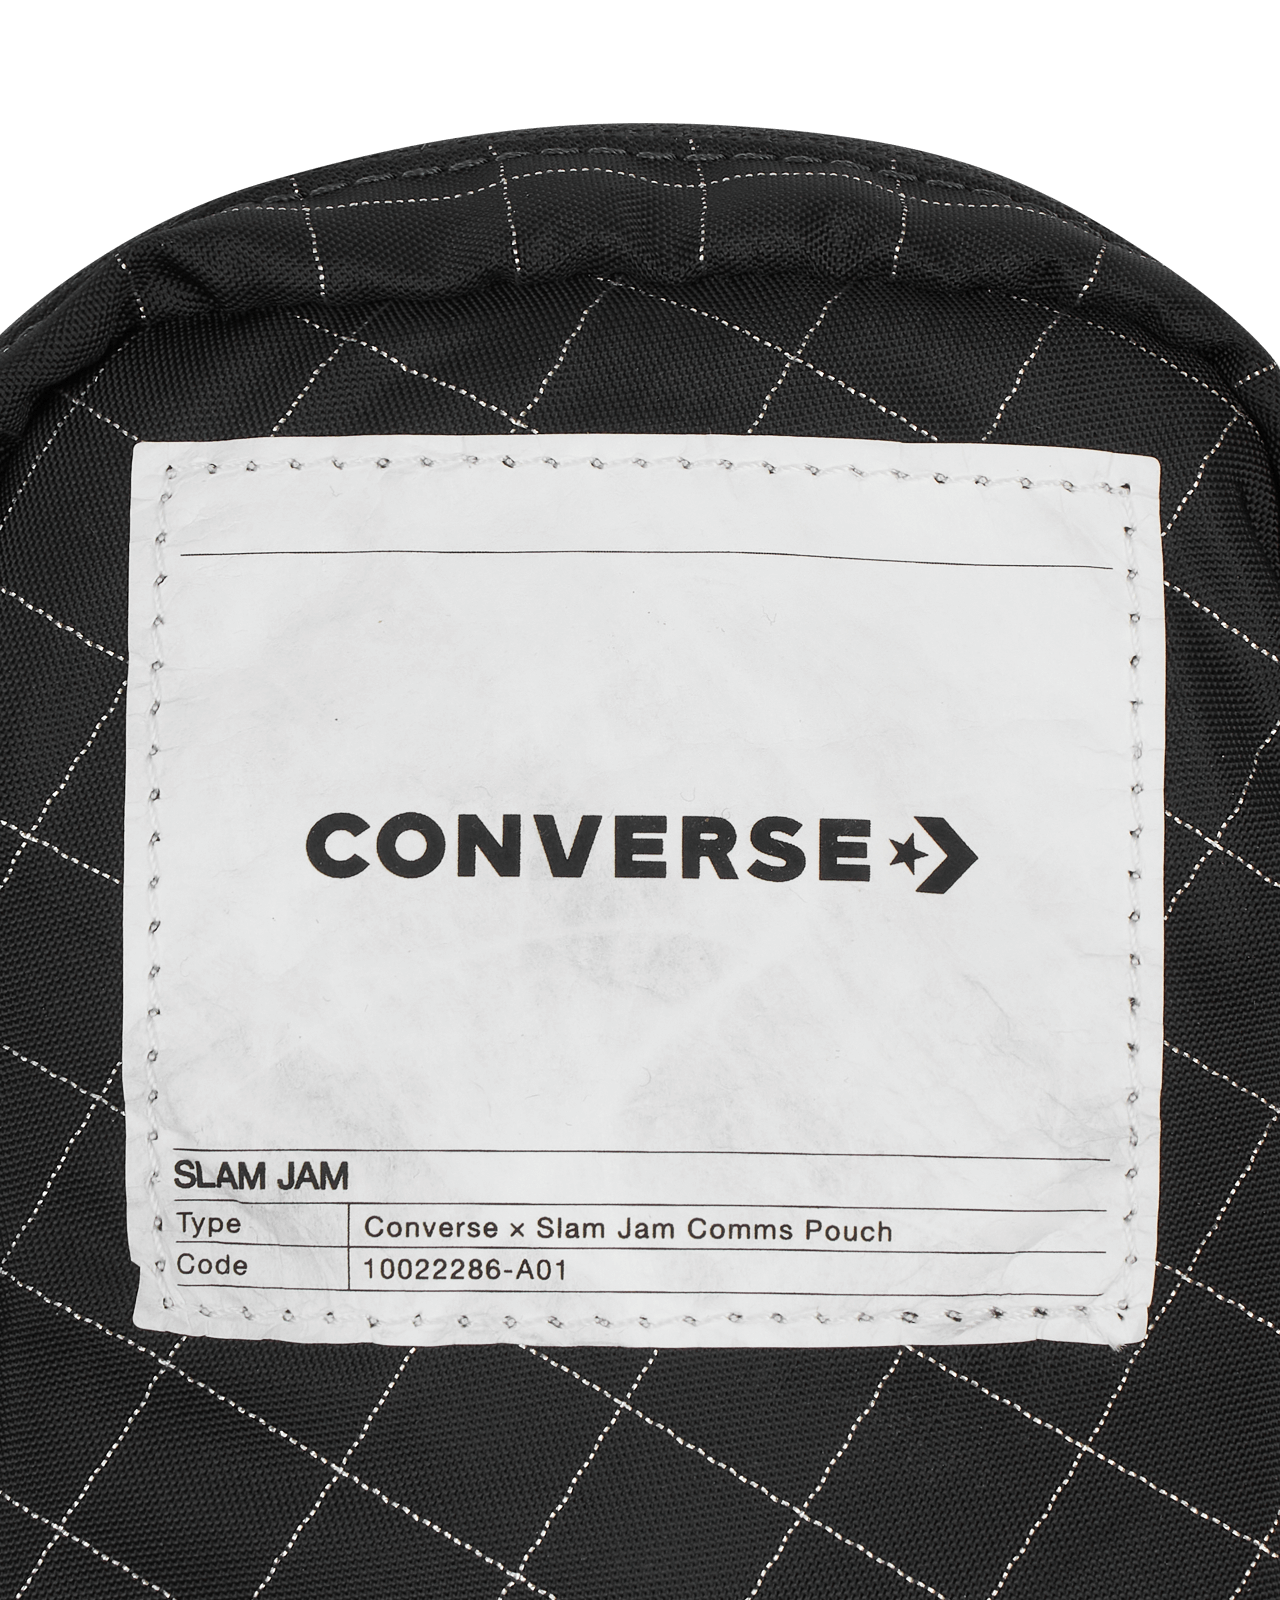 Converse Converse X Slam Jam Comms Pouch Egret Bags and Backpacks Pouches 10022286-A01